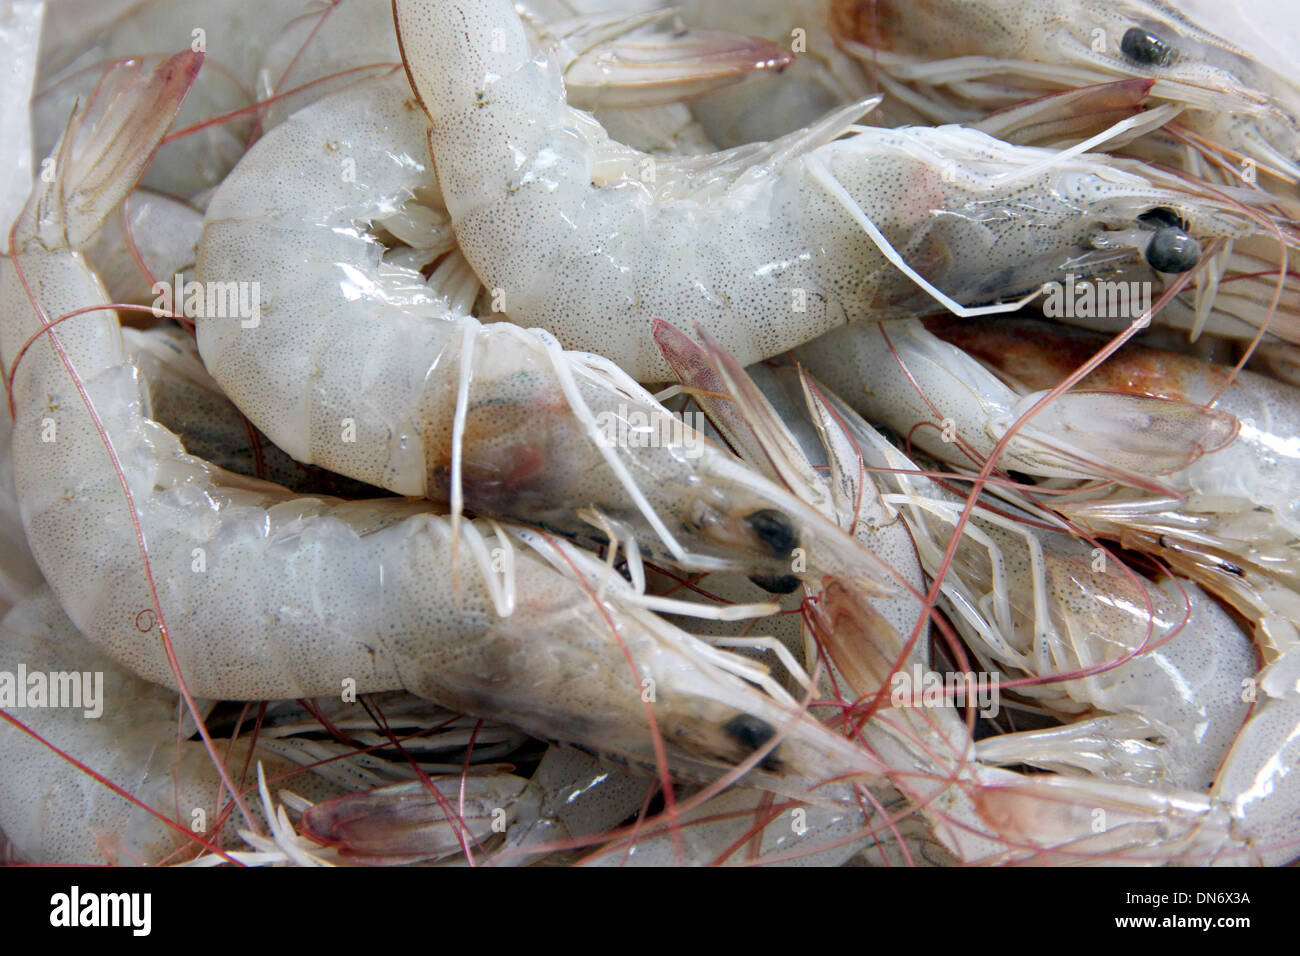 The Picture Many raw shrimp as garnish in cooking. Stock Photo